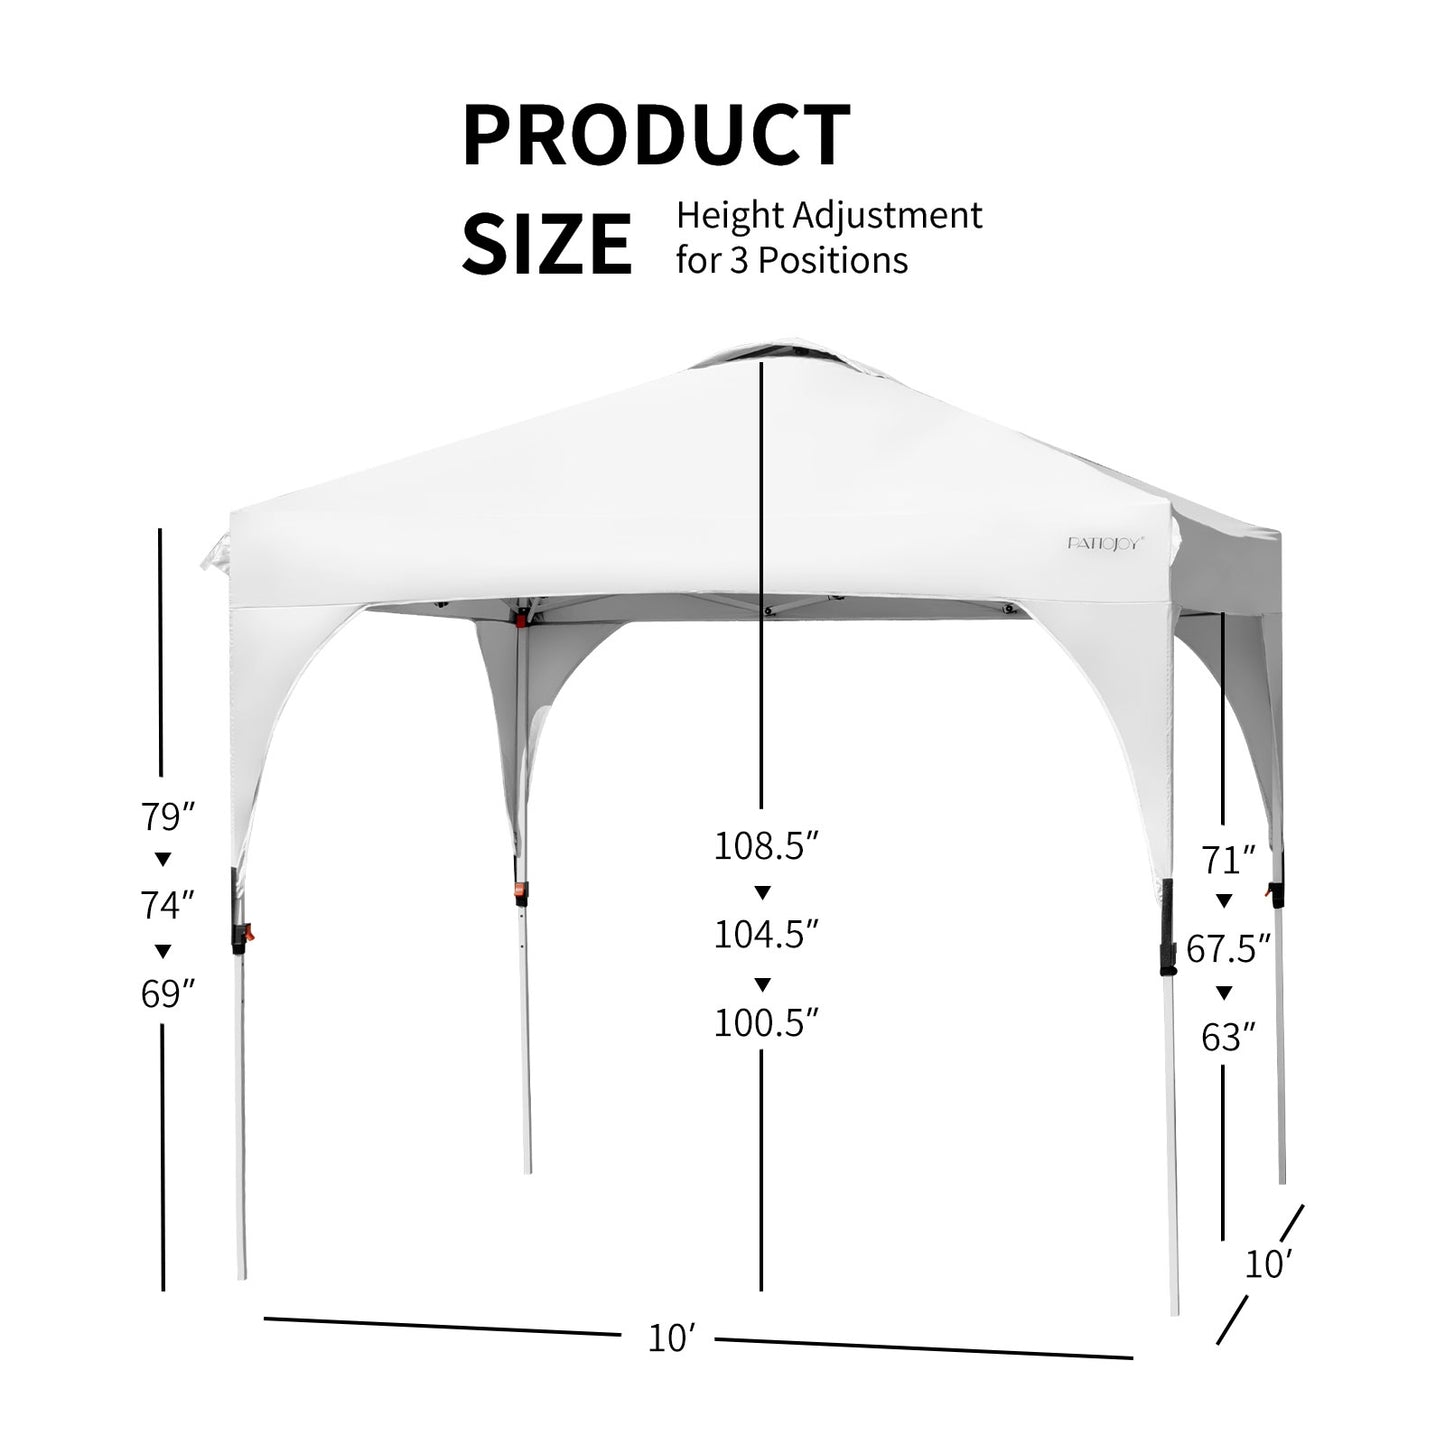 10 Feet x 10 Feet Outdoor Pop-up Camping Canopy Tent with Roller Bag-White